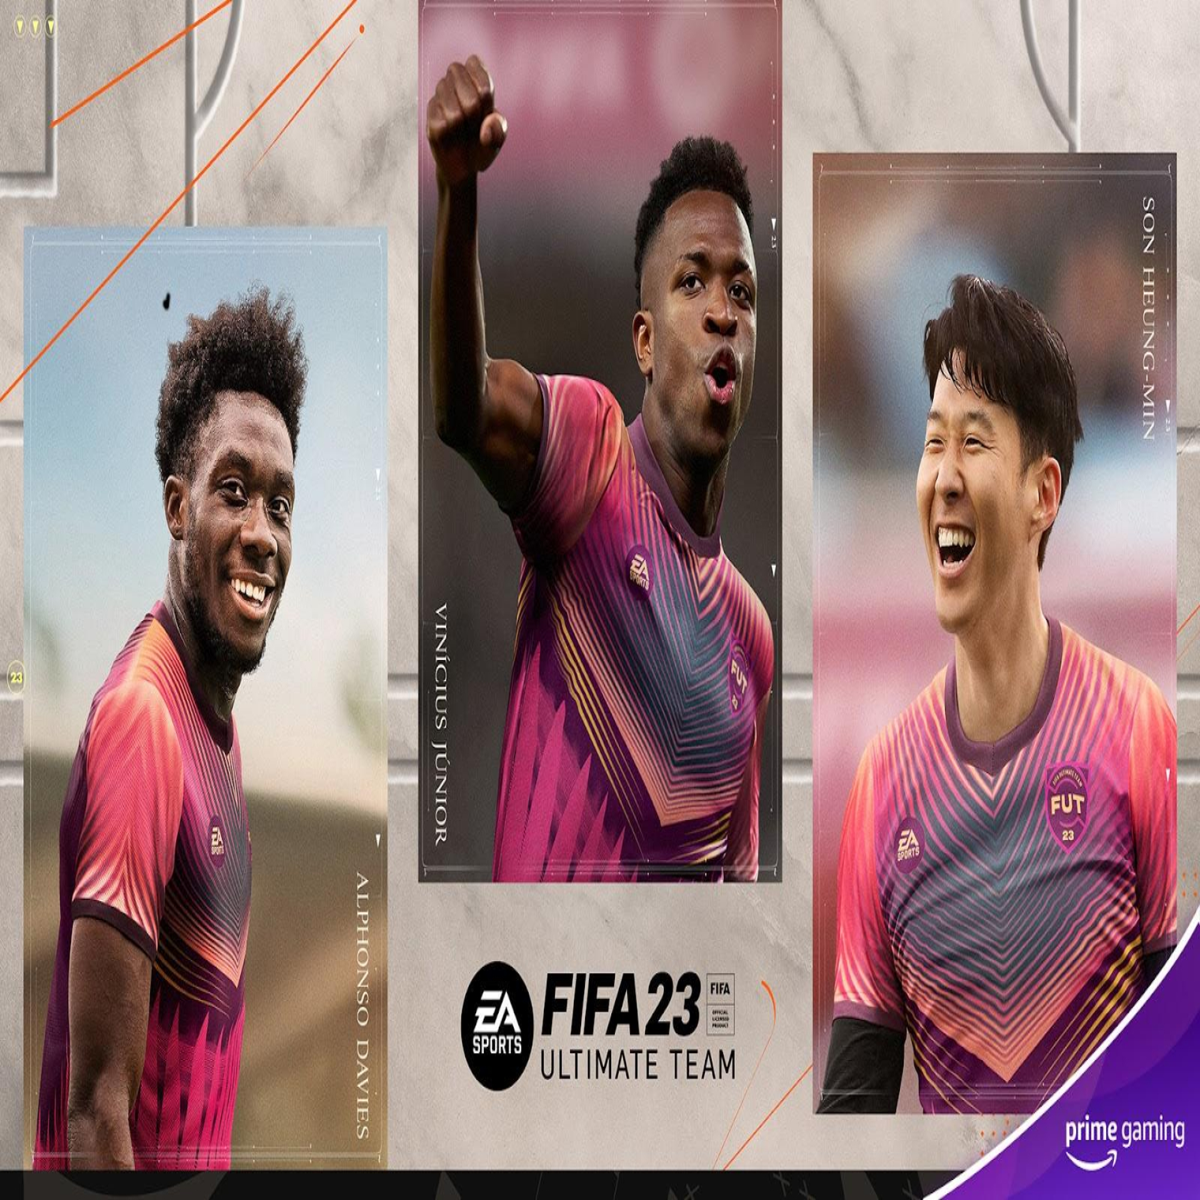 FIFA 23: How to spot the BEST players in FUT packs